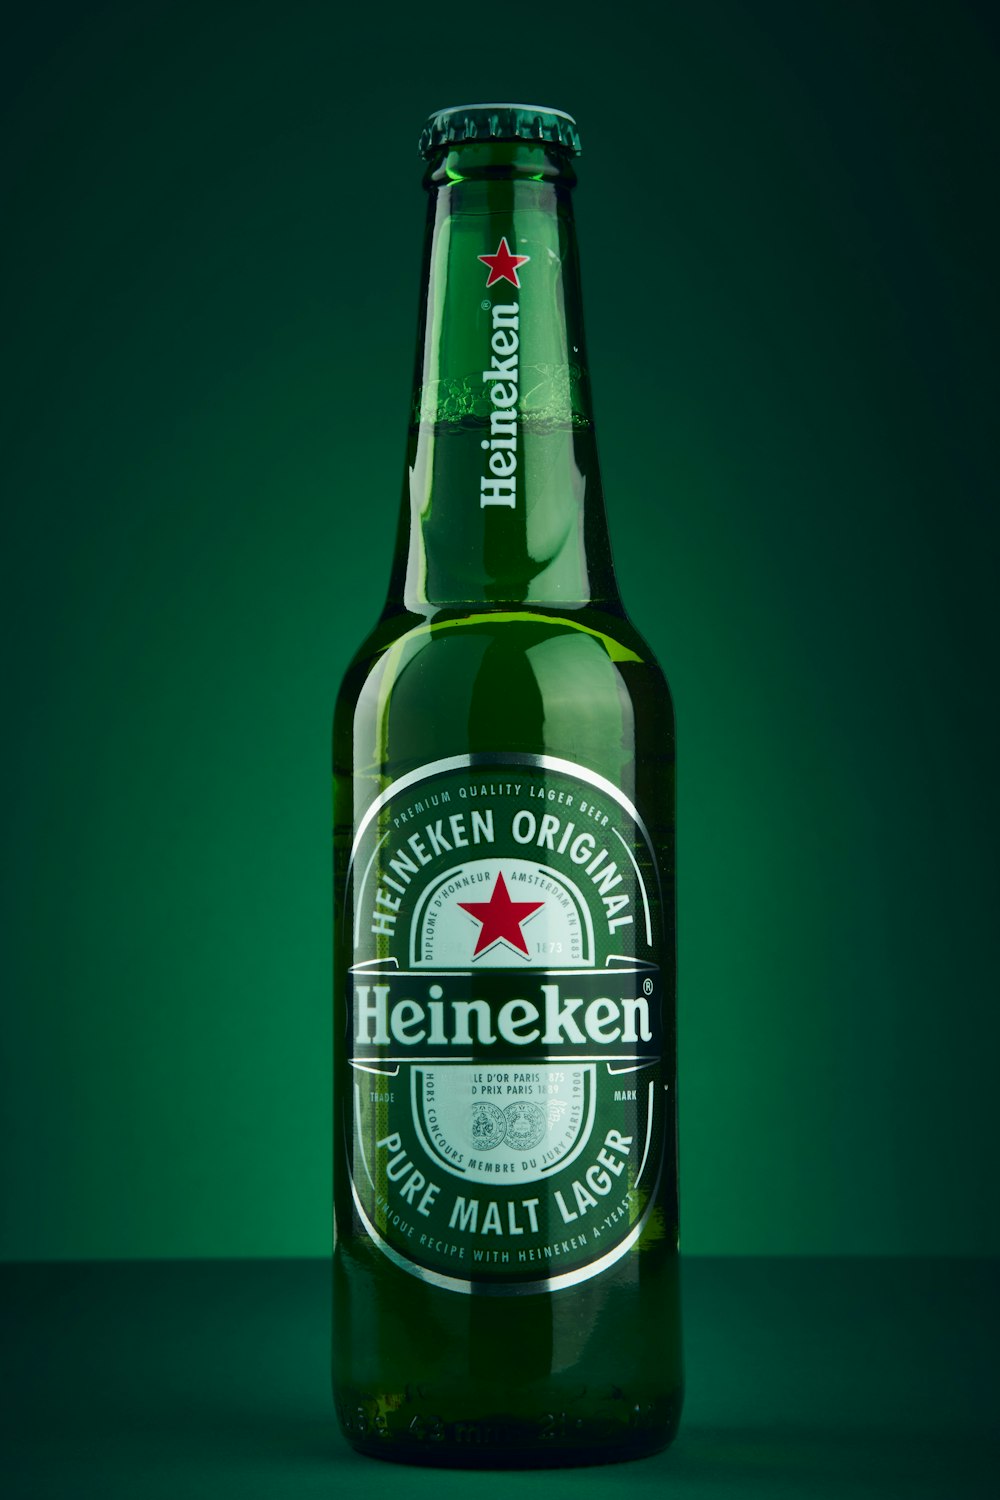 750+ [HQ] Beer Bottle Pictures | Download Free Images & Stock ...